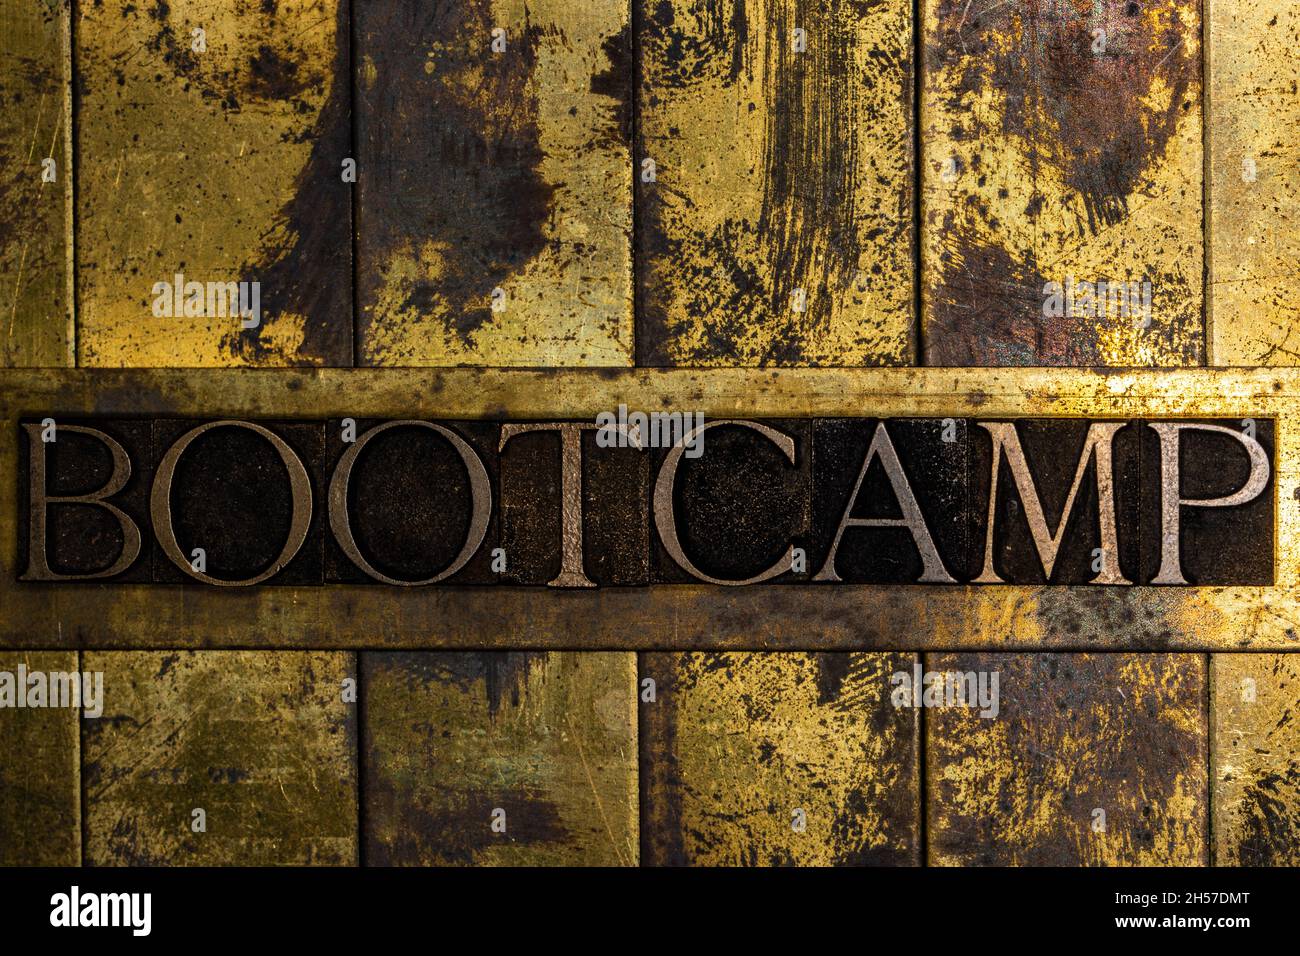 Bootcamp text message on textured grunge copper and vintage gold background Stock Photo